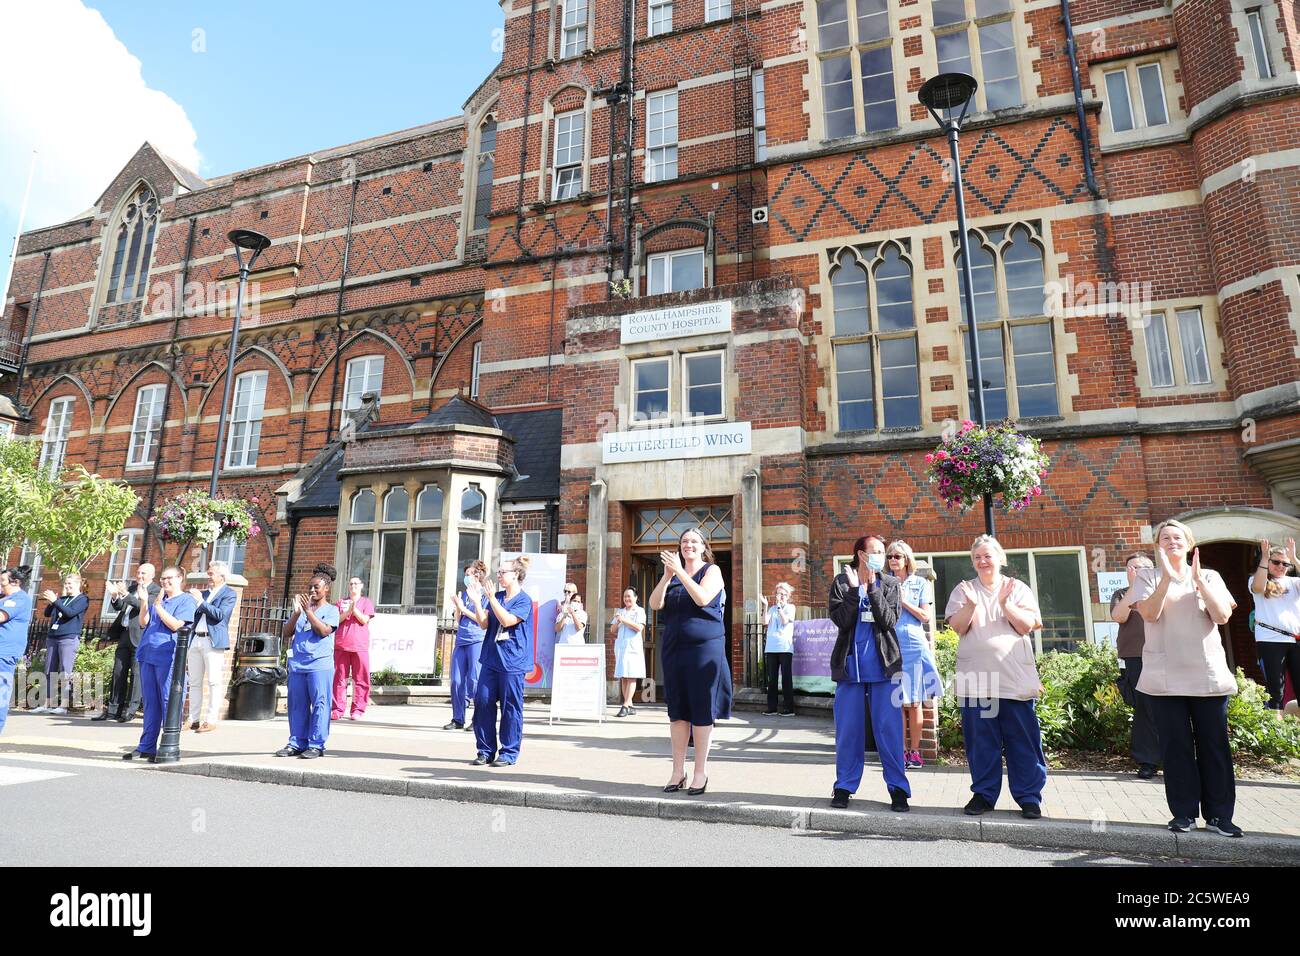 Winchester, Hampshire, UK. 5th July 2020. Clap for carers appreciation at Royal Hampshire County Hospital in Winchester, celebrating the 72nd anniversary of the NHS. Staff at the hospital took part in the applause, before singing happy birthday to the NHS. Credit Stuart Martin/Alamy Live News Stock Photo